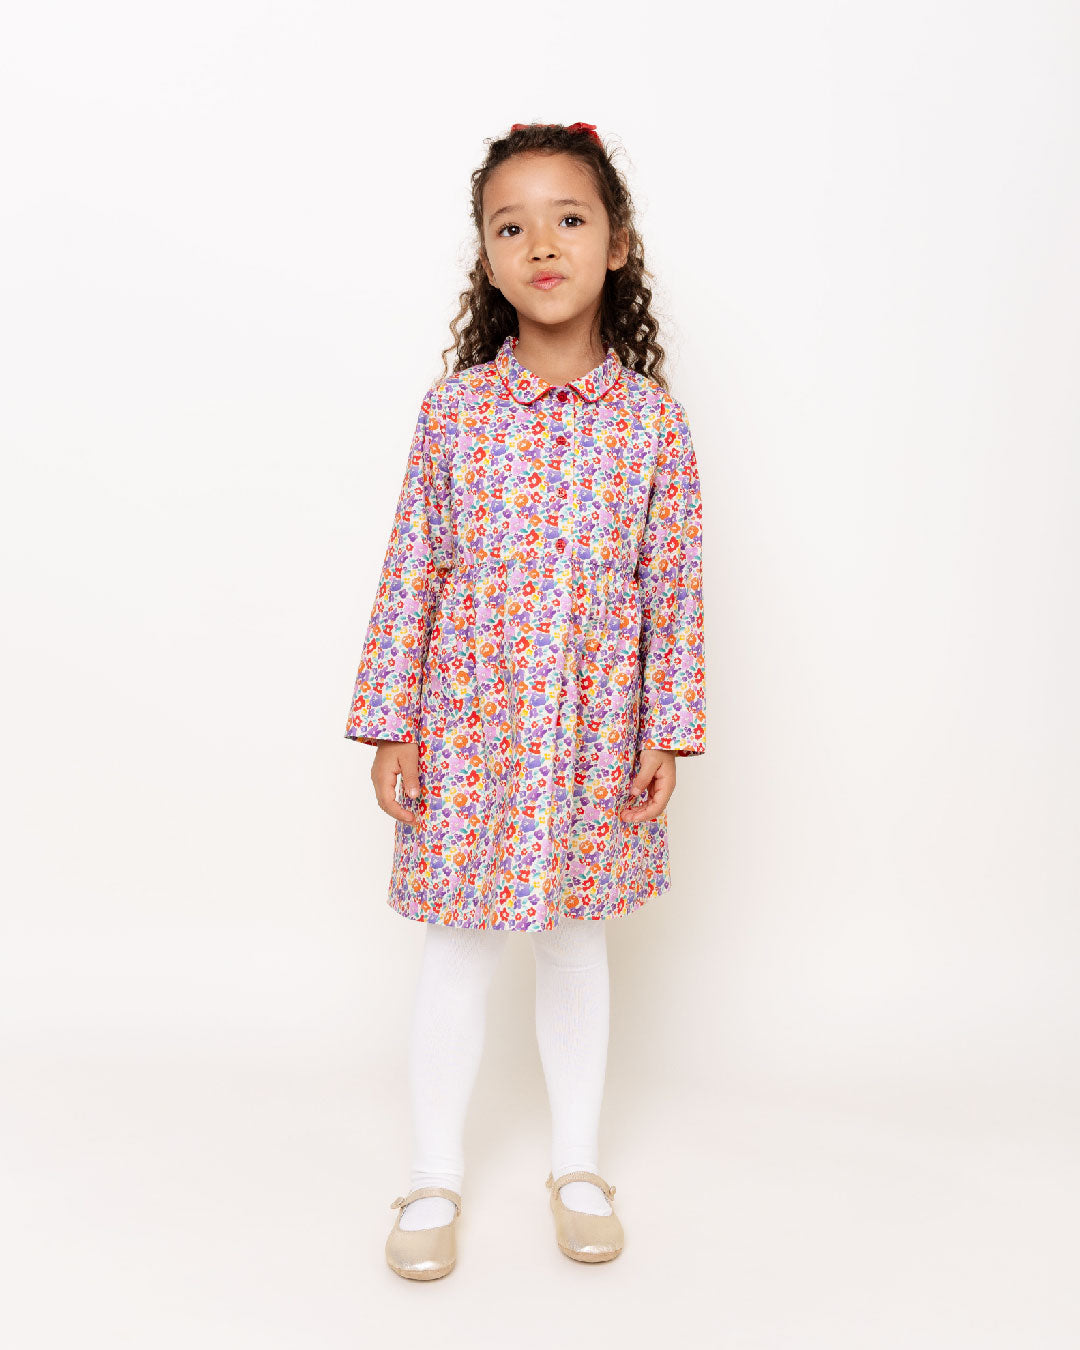 Olympia Autumn Floral Dress - Child